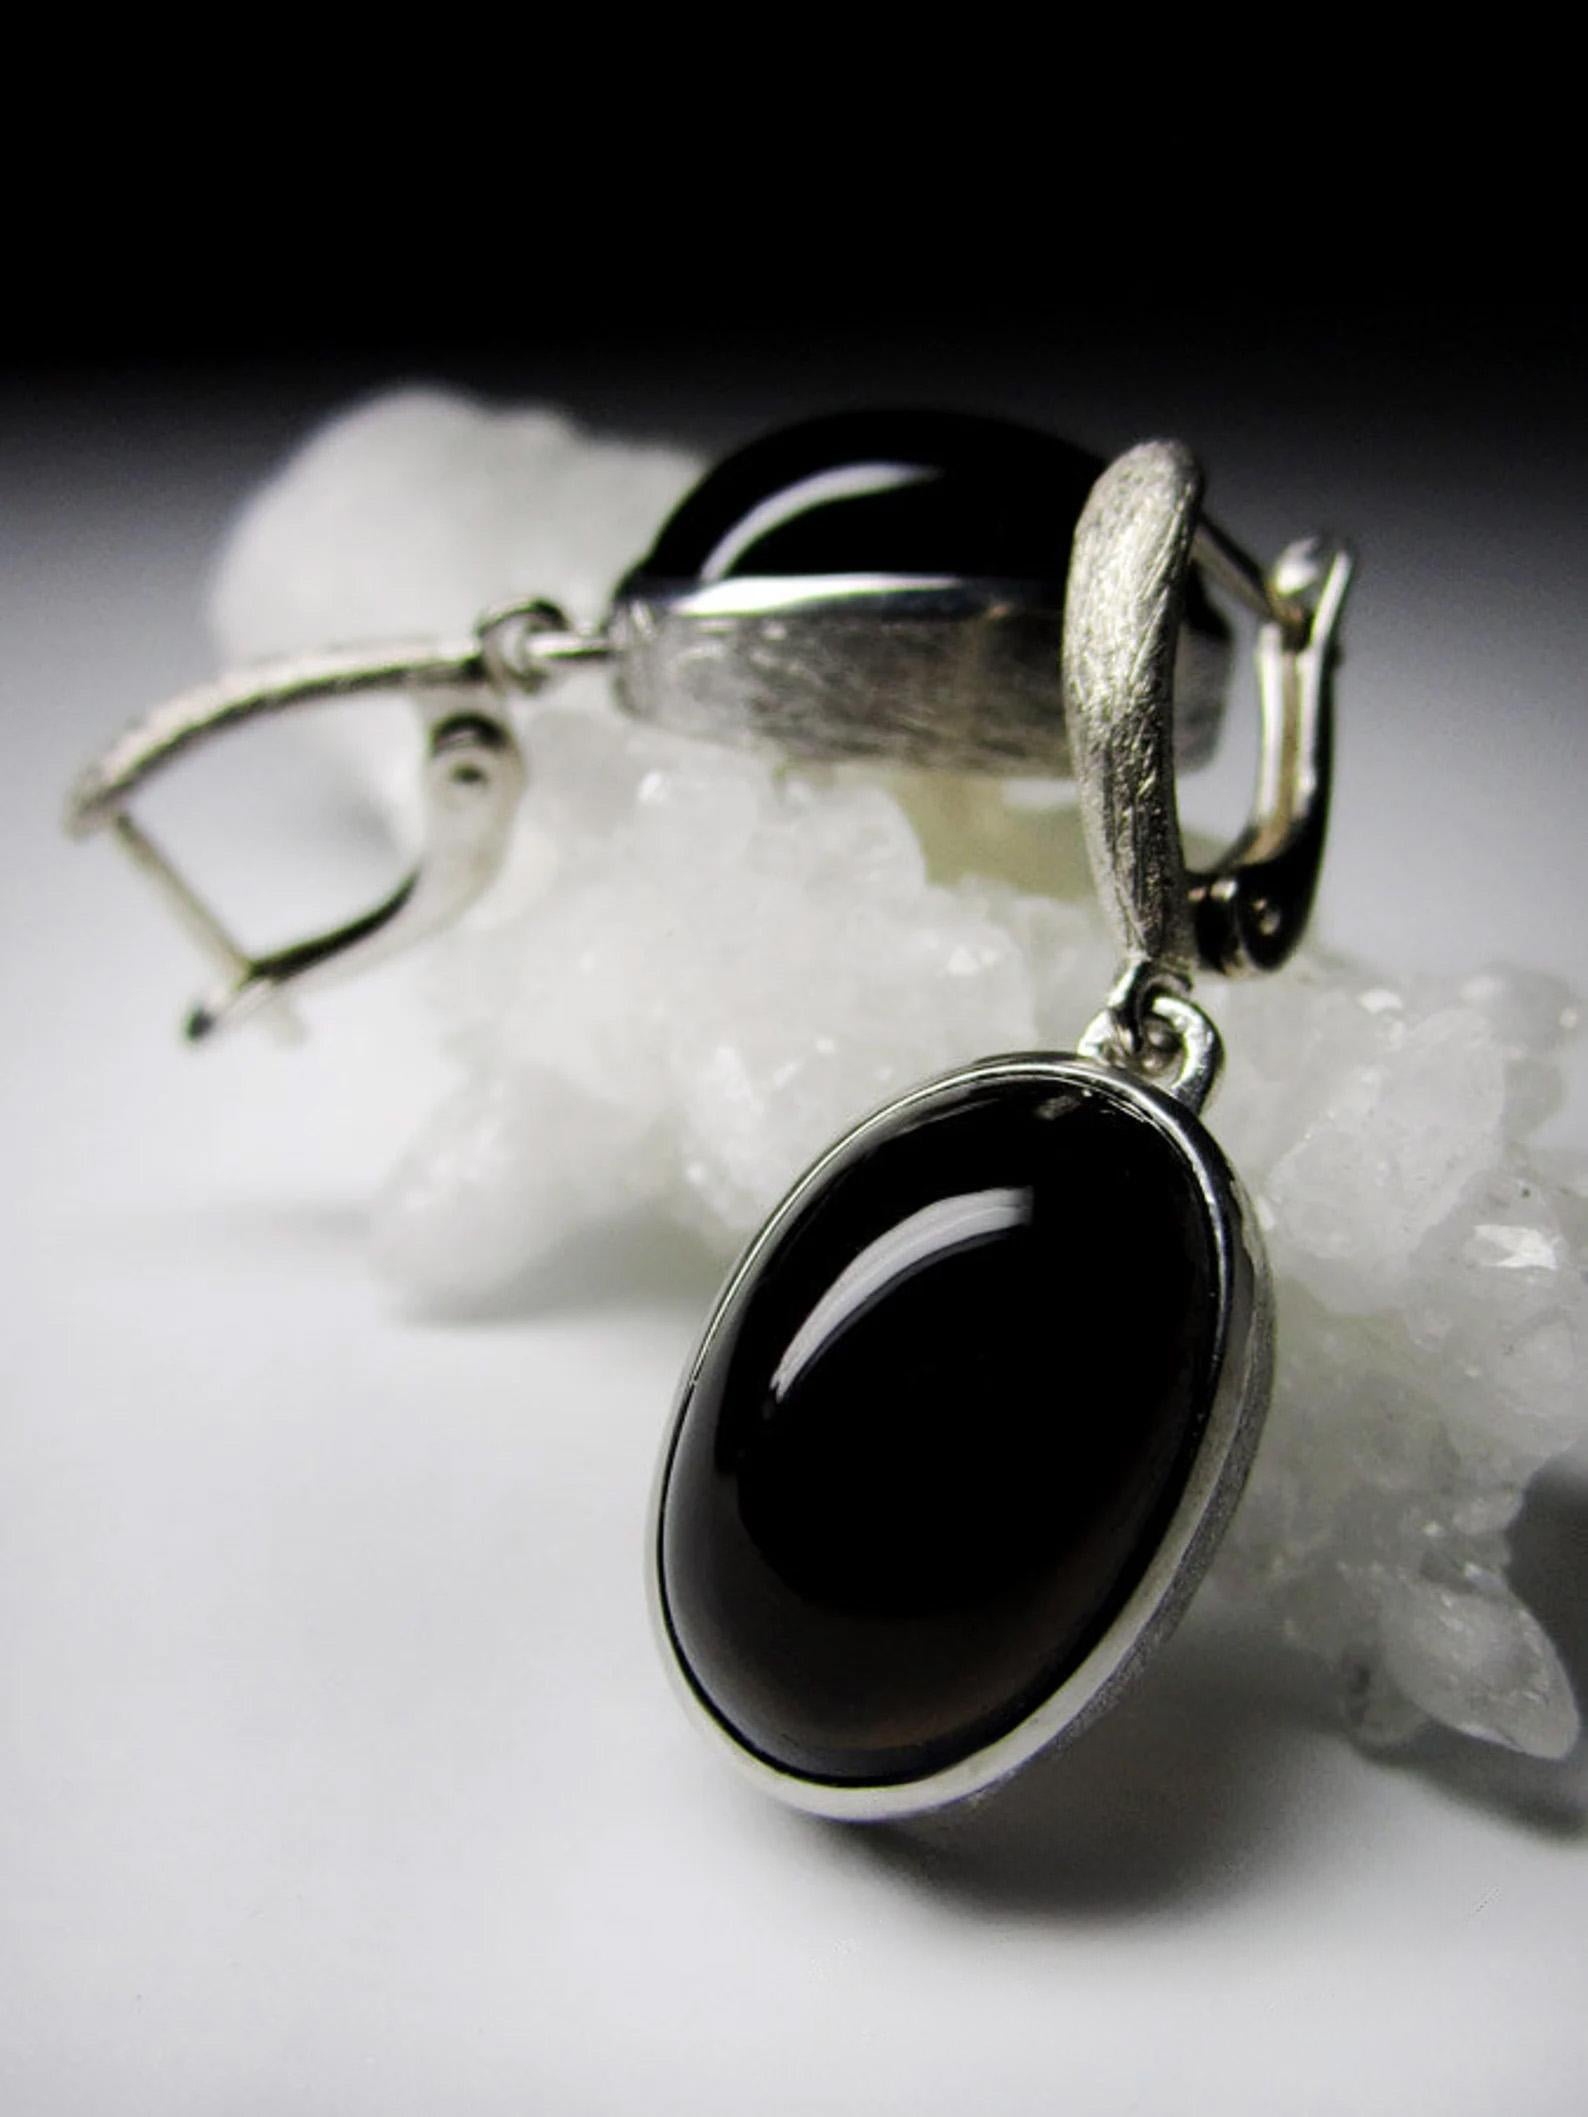 Oval Cut Morion Quartz Scratched Silver Earrings Cabochon Oval Onyx Black Color Gemstone  For Sale